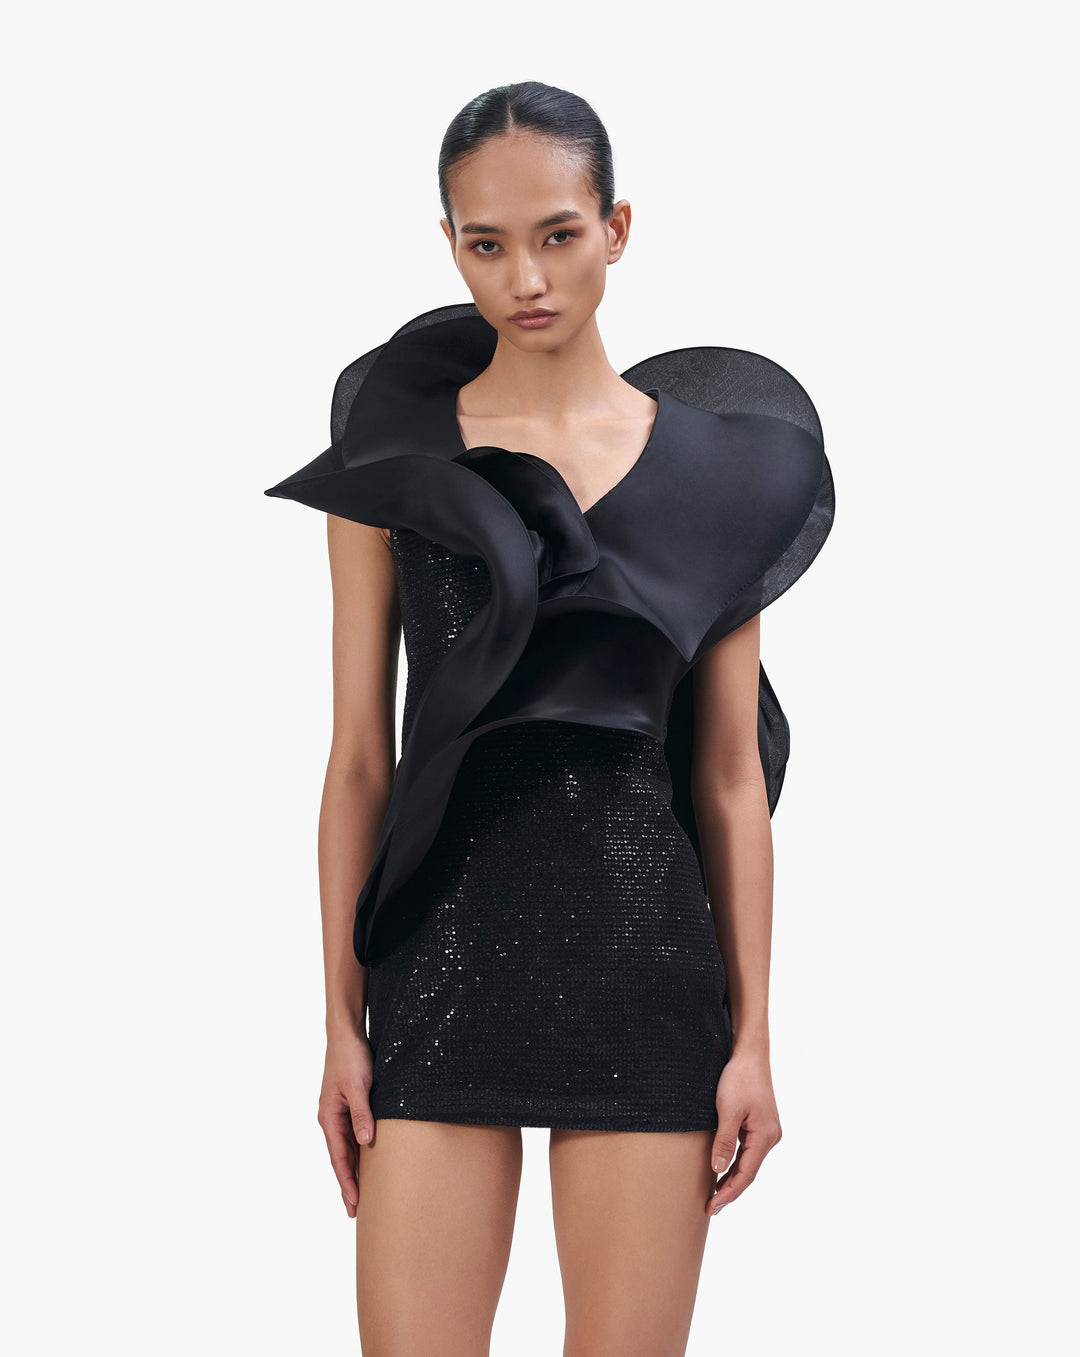 The Deconstructed Shimmer Ruffle Dress